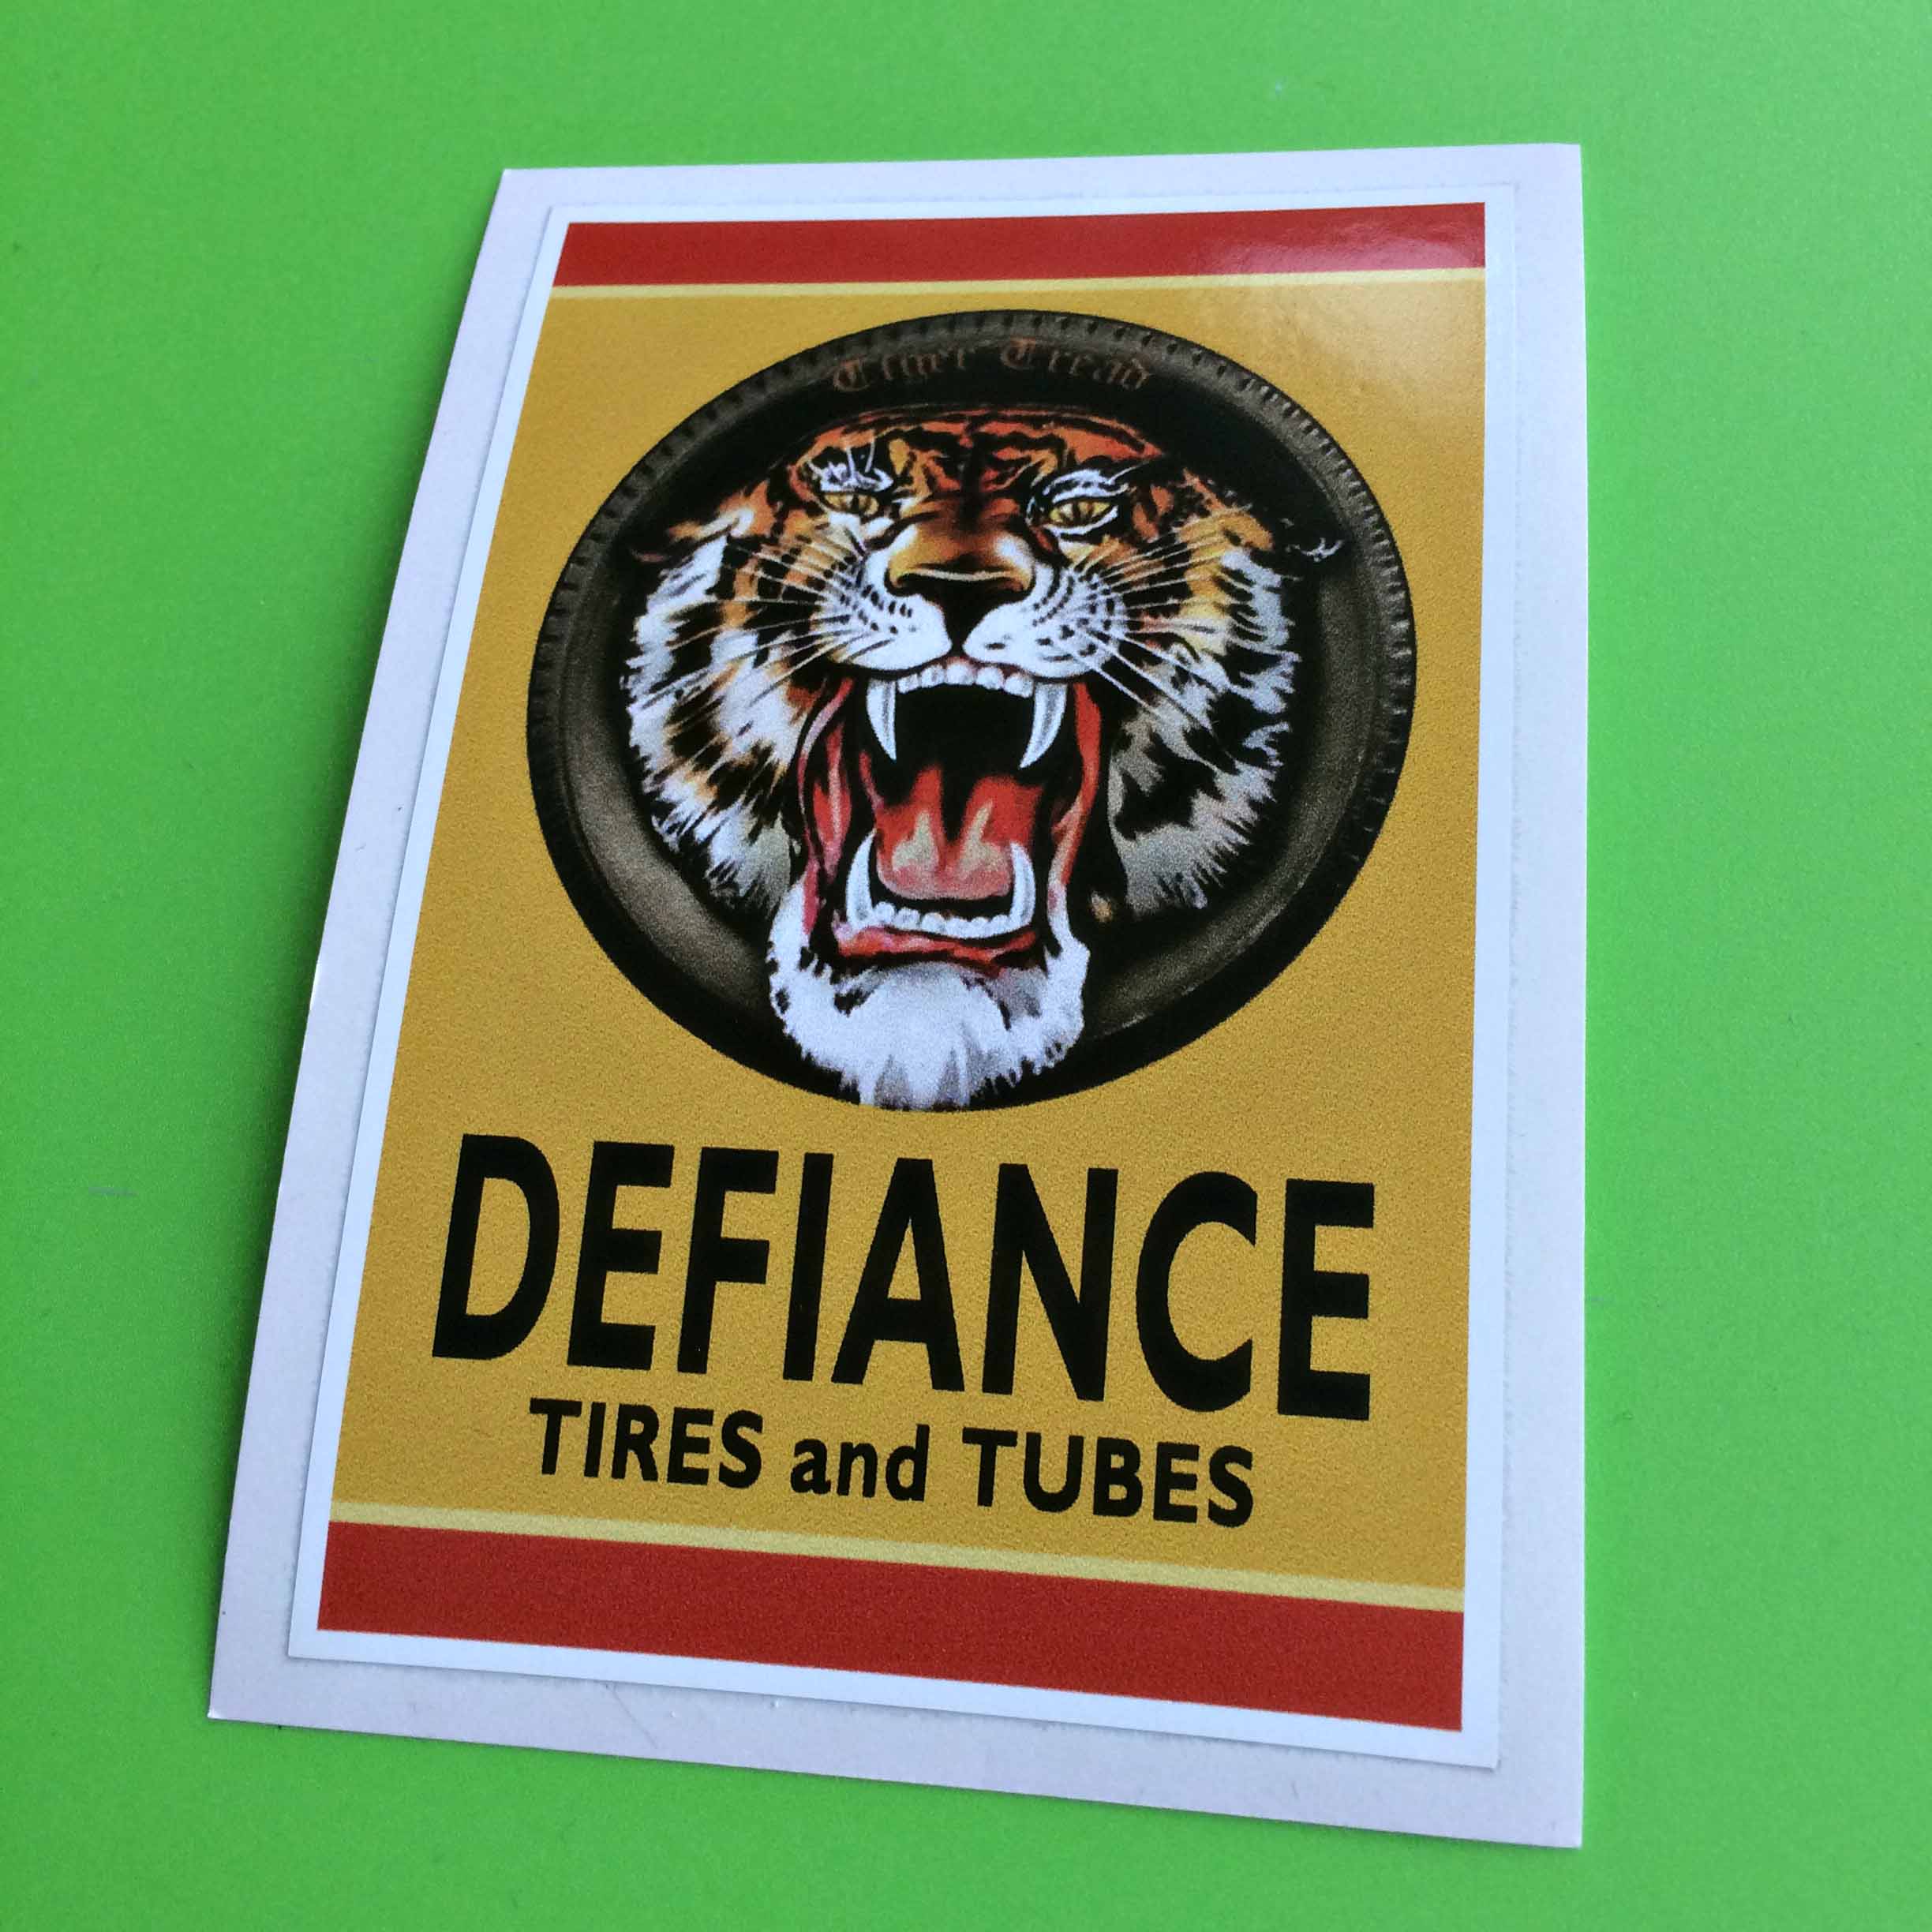 Defiance Tires and Tubes in black uppercase lettering on a yellow sticker with the top and bottom edges in red. A tiger's head with mouth wide open displaying a red tongue and sharp fangs sits inside a tyre.